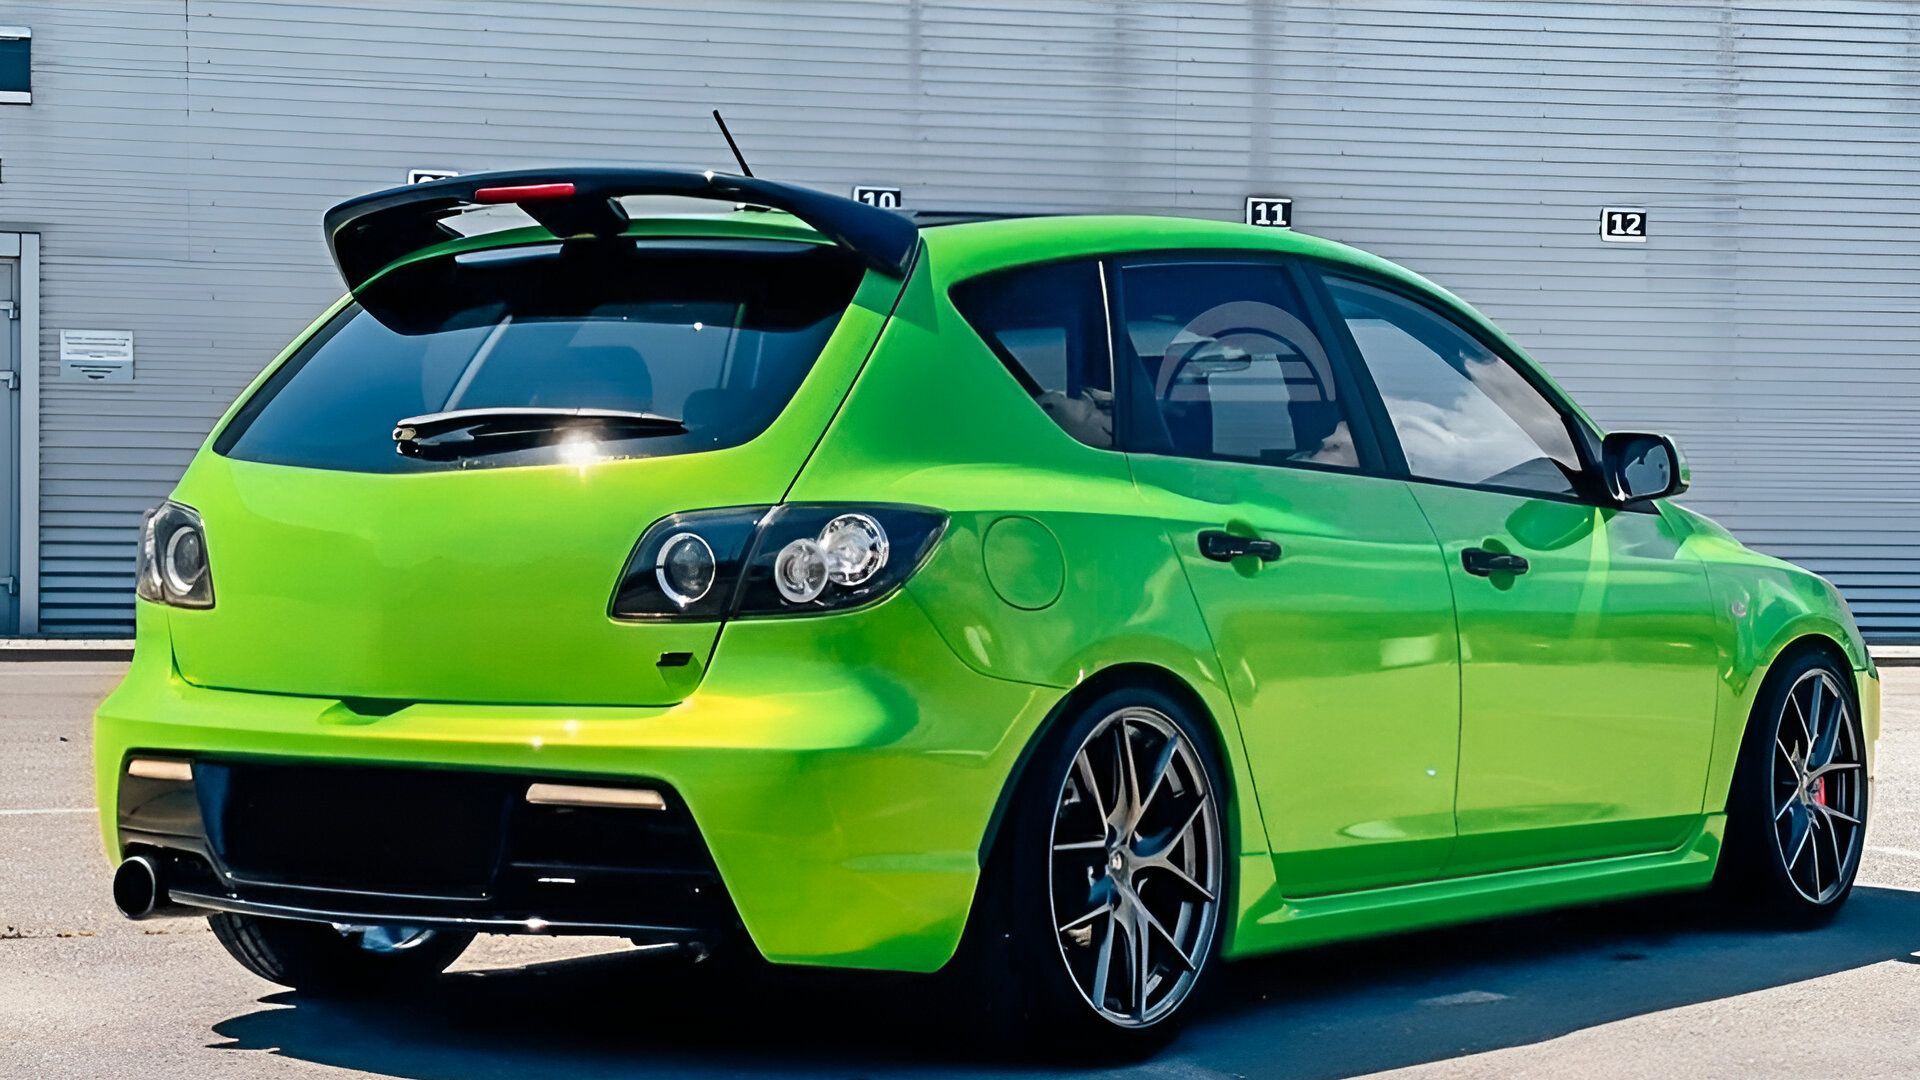 green 2007 Mazda Mazda3 with a bodykit  parked